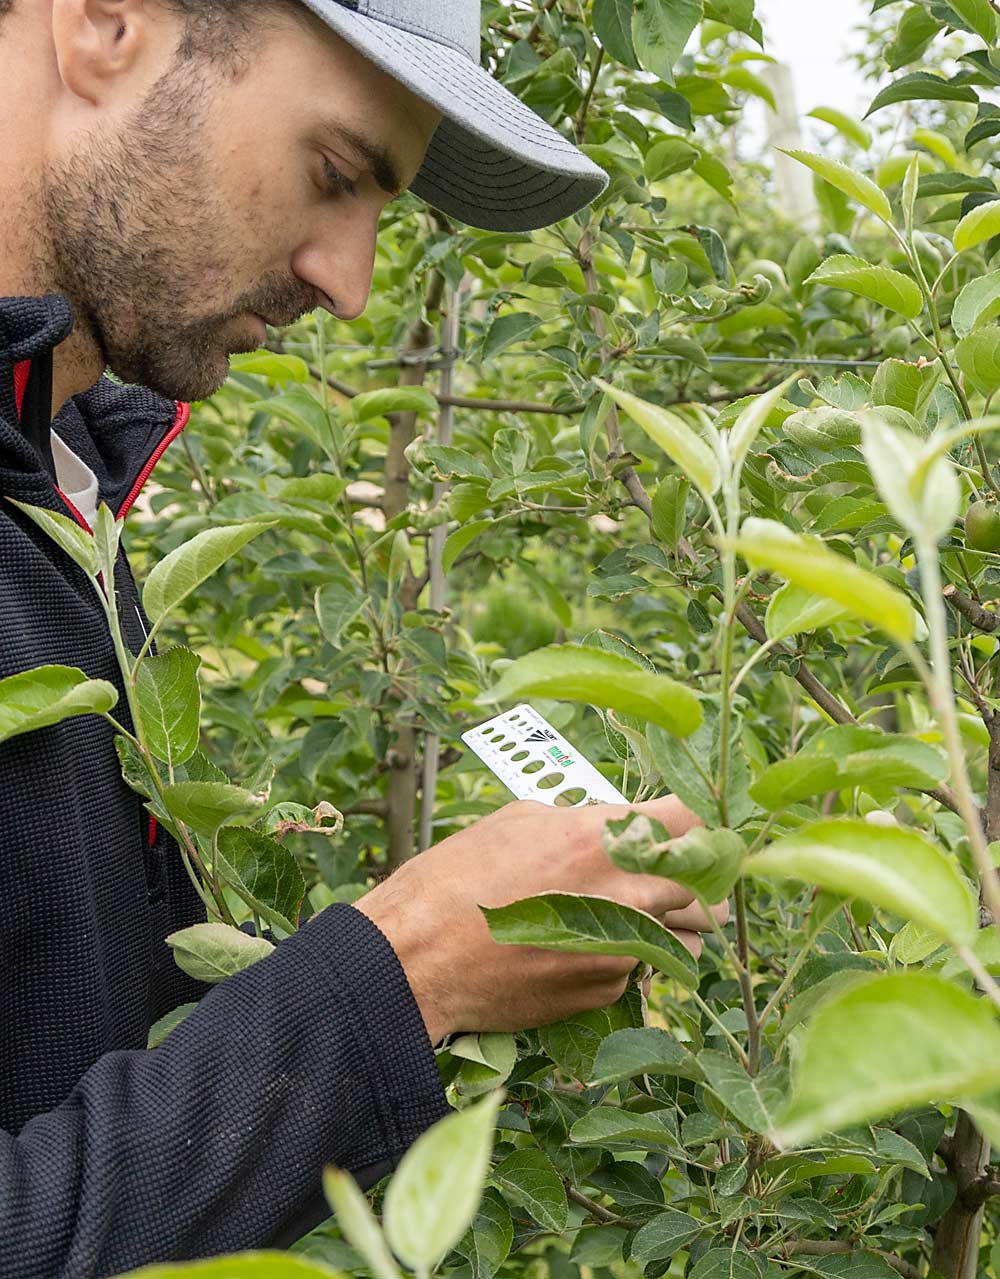 Wittenbach, seen here measuring fruitlets, studied horticulture at Michigan State University. He said LTI’s members want to learn more about thinning, fertigation and chemigation. (Matt Milkovich/Good Fruit Grower)